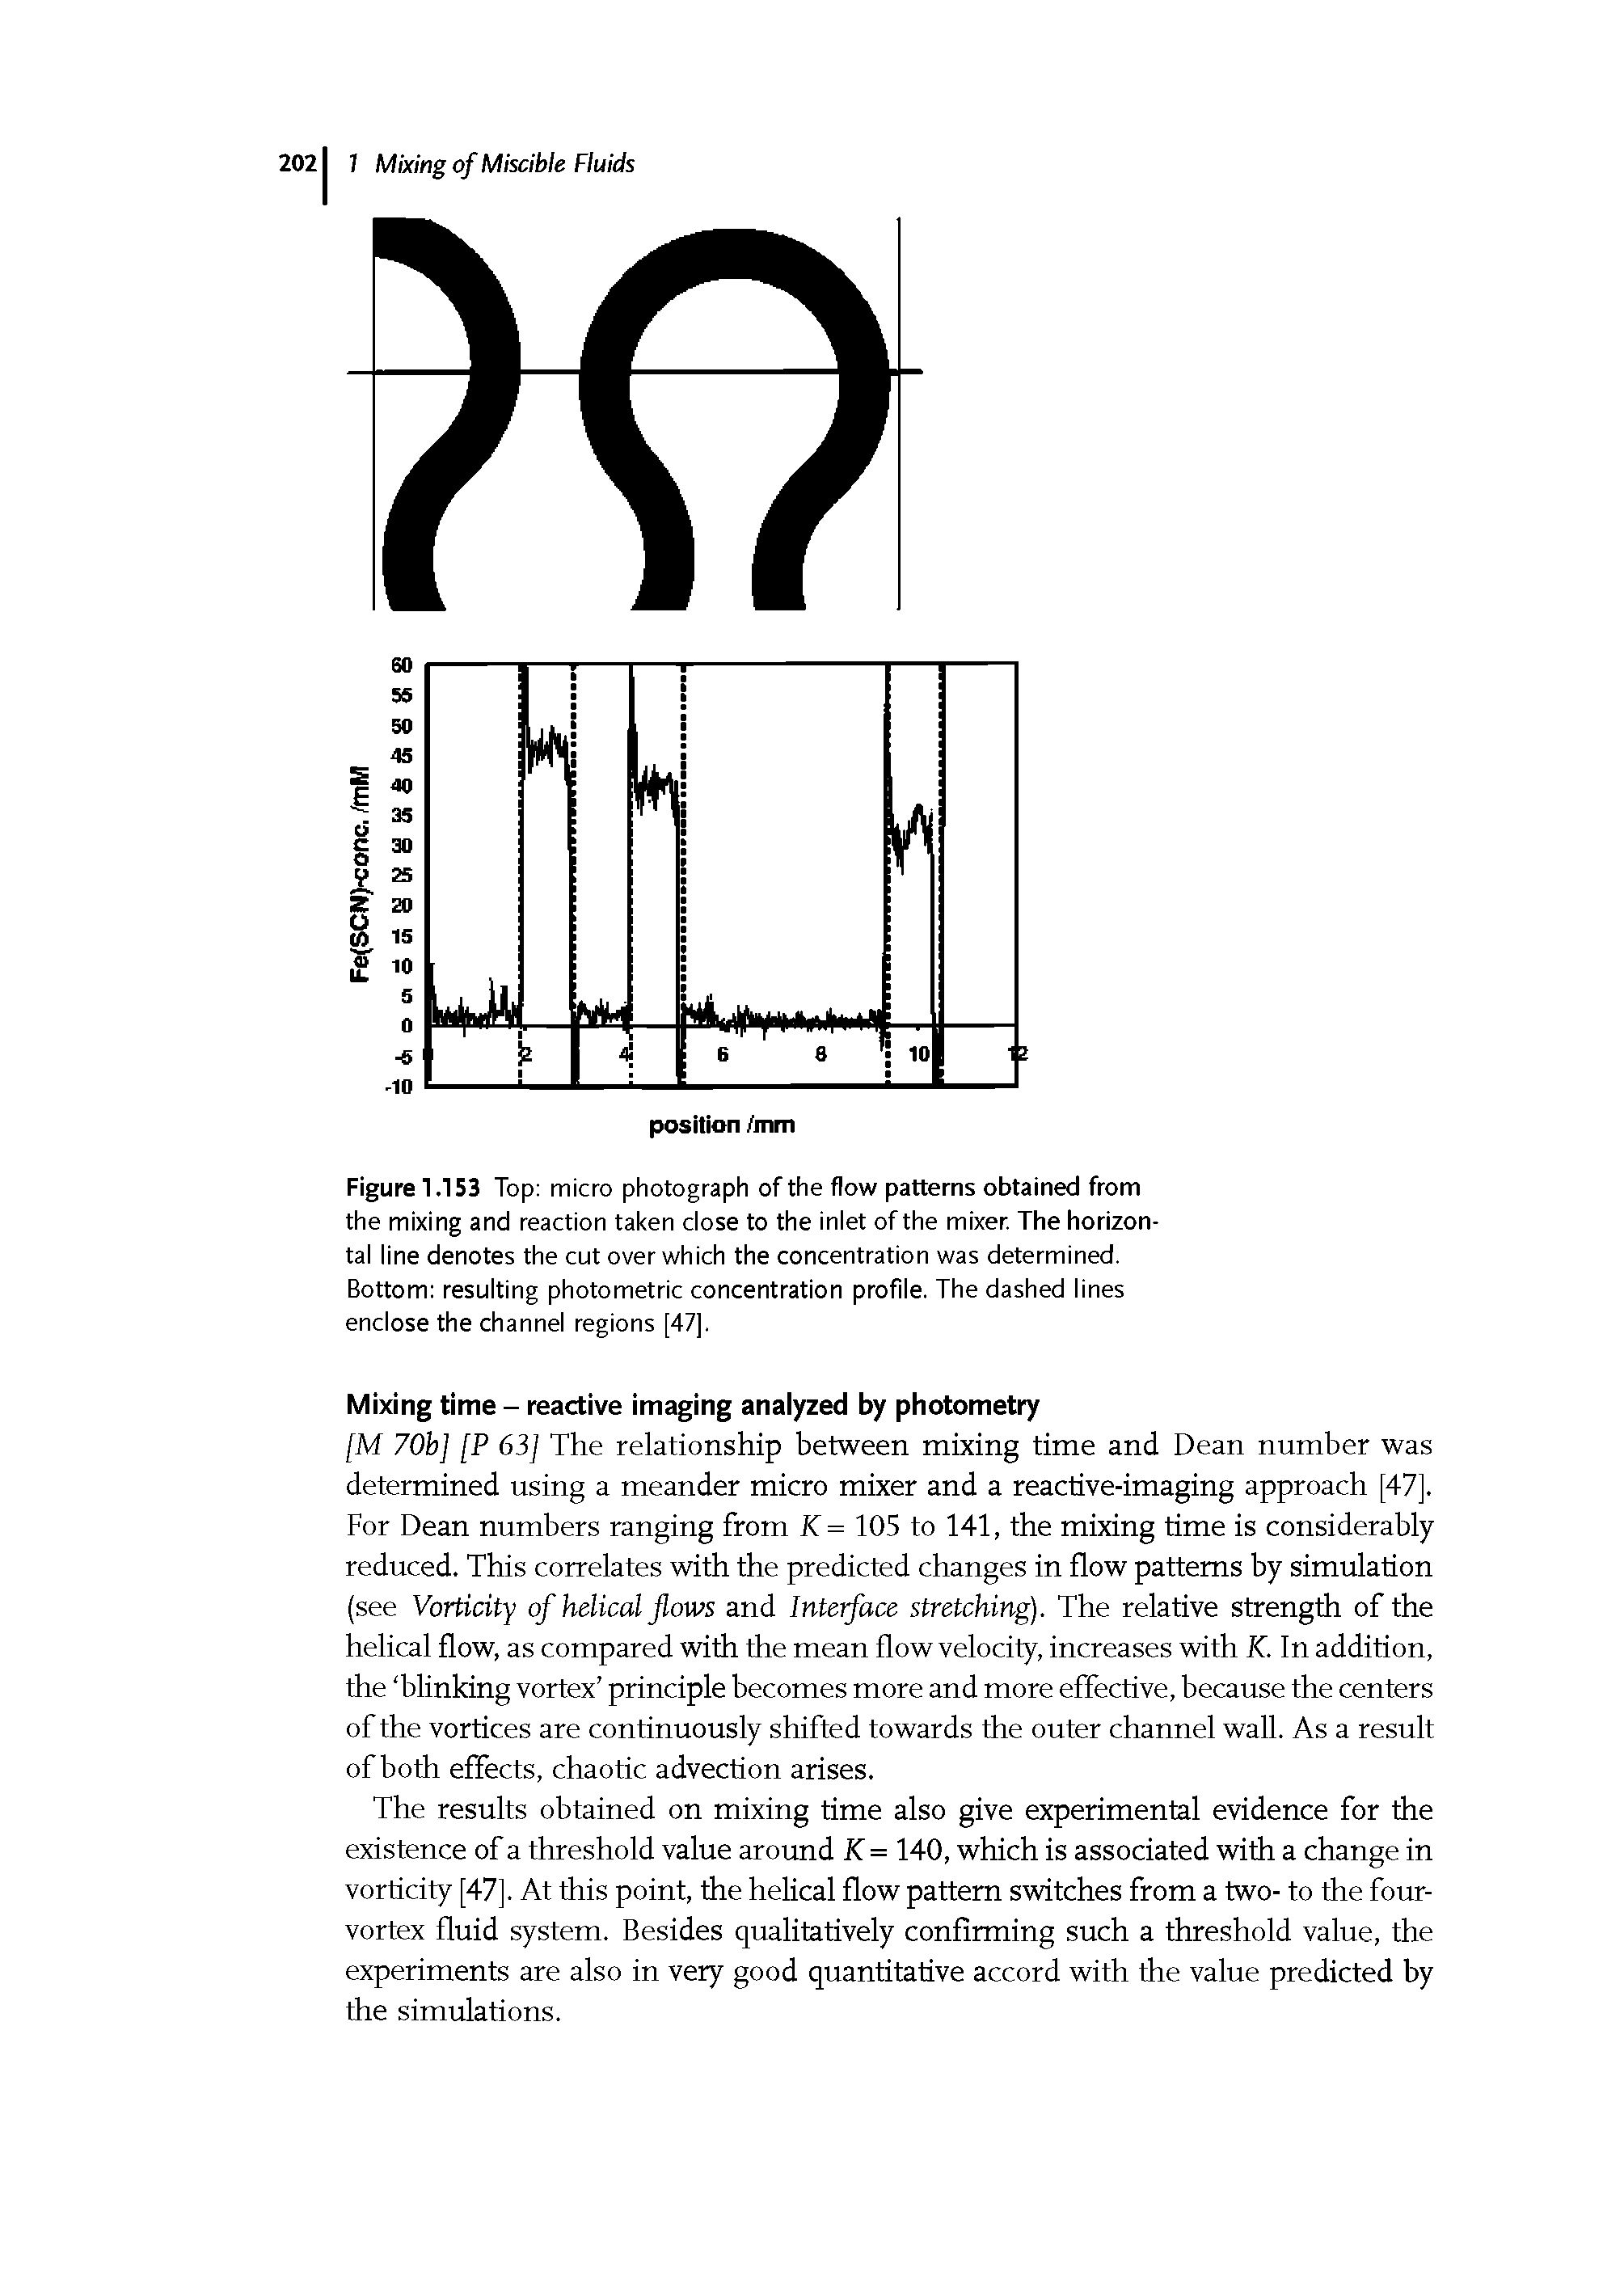 Figure 1.153 Top micro photograph of the flow patterns obtained from the mixing and reaction taken close to the inlet of the mixer. The horizontal line denotes the cut over which the concentration was determined.